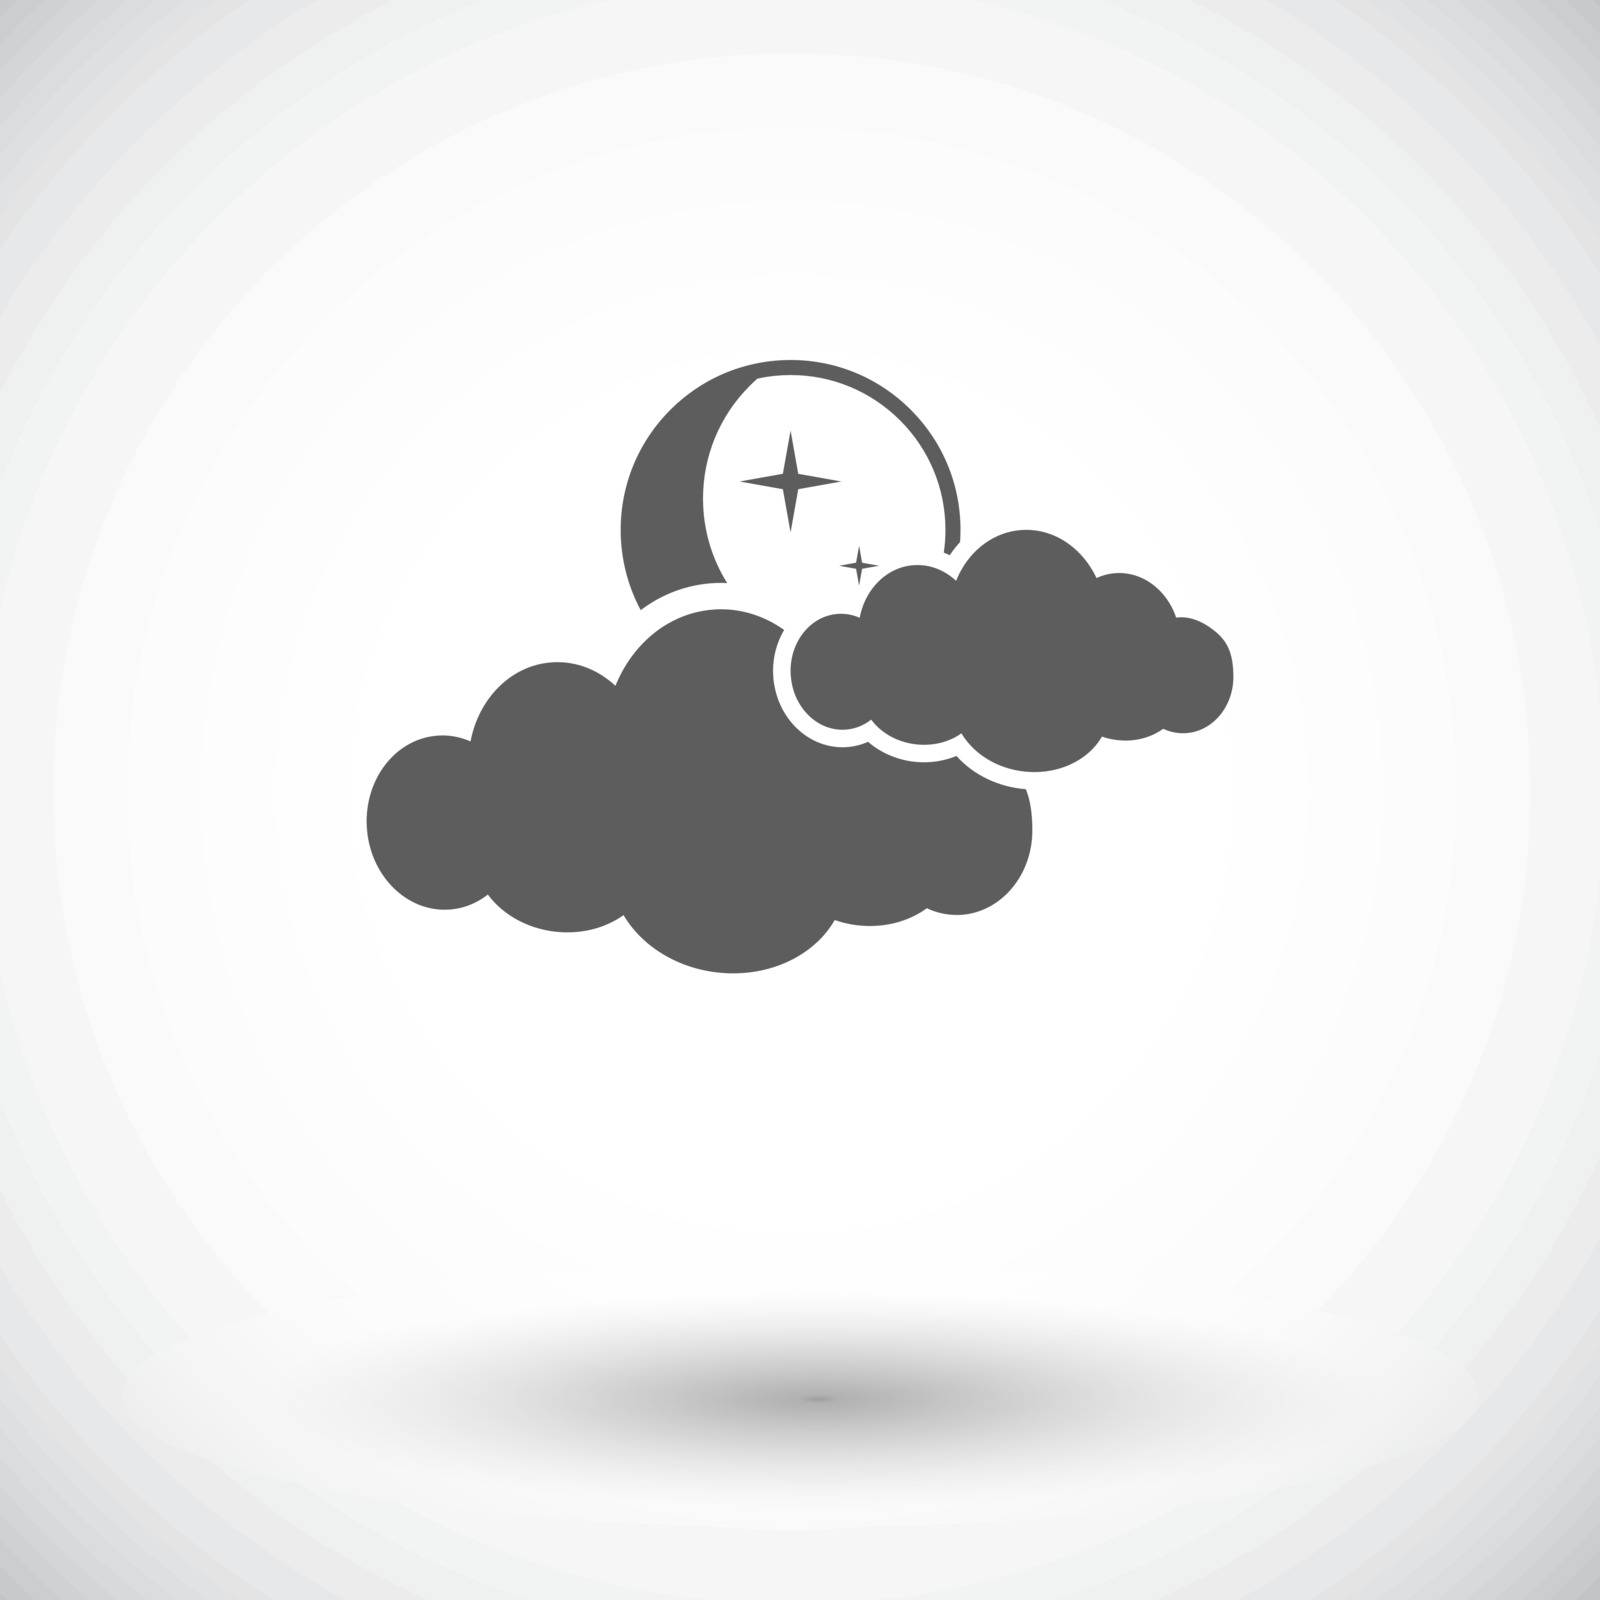 Cloud, moon, star. Single flat icon on white background. Vector illustration.